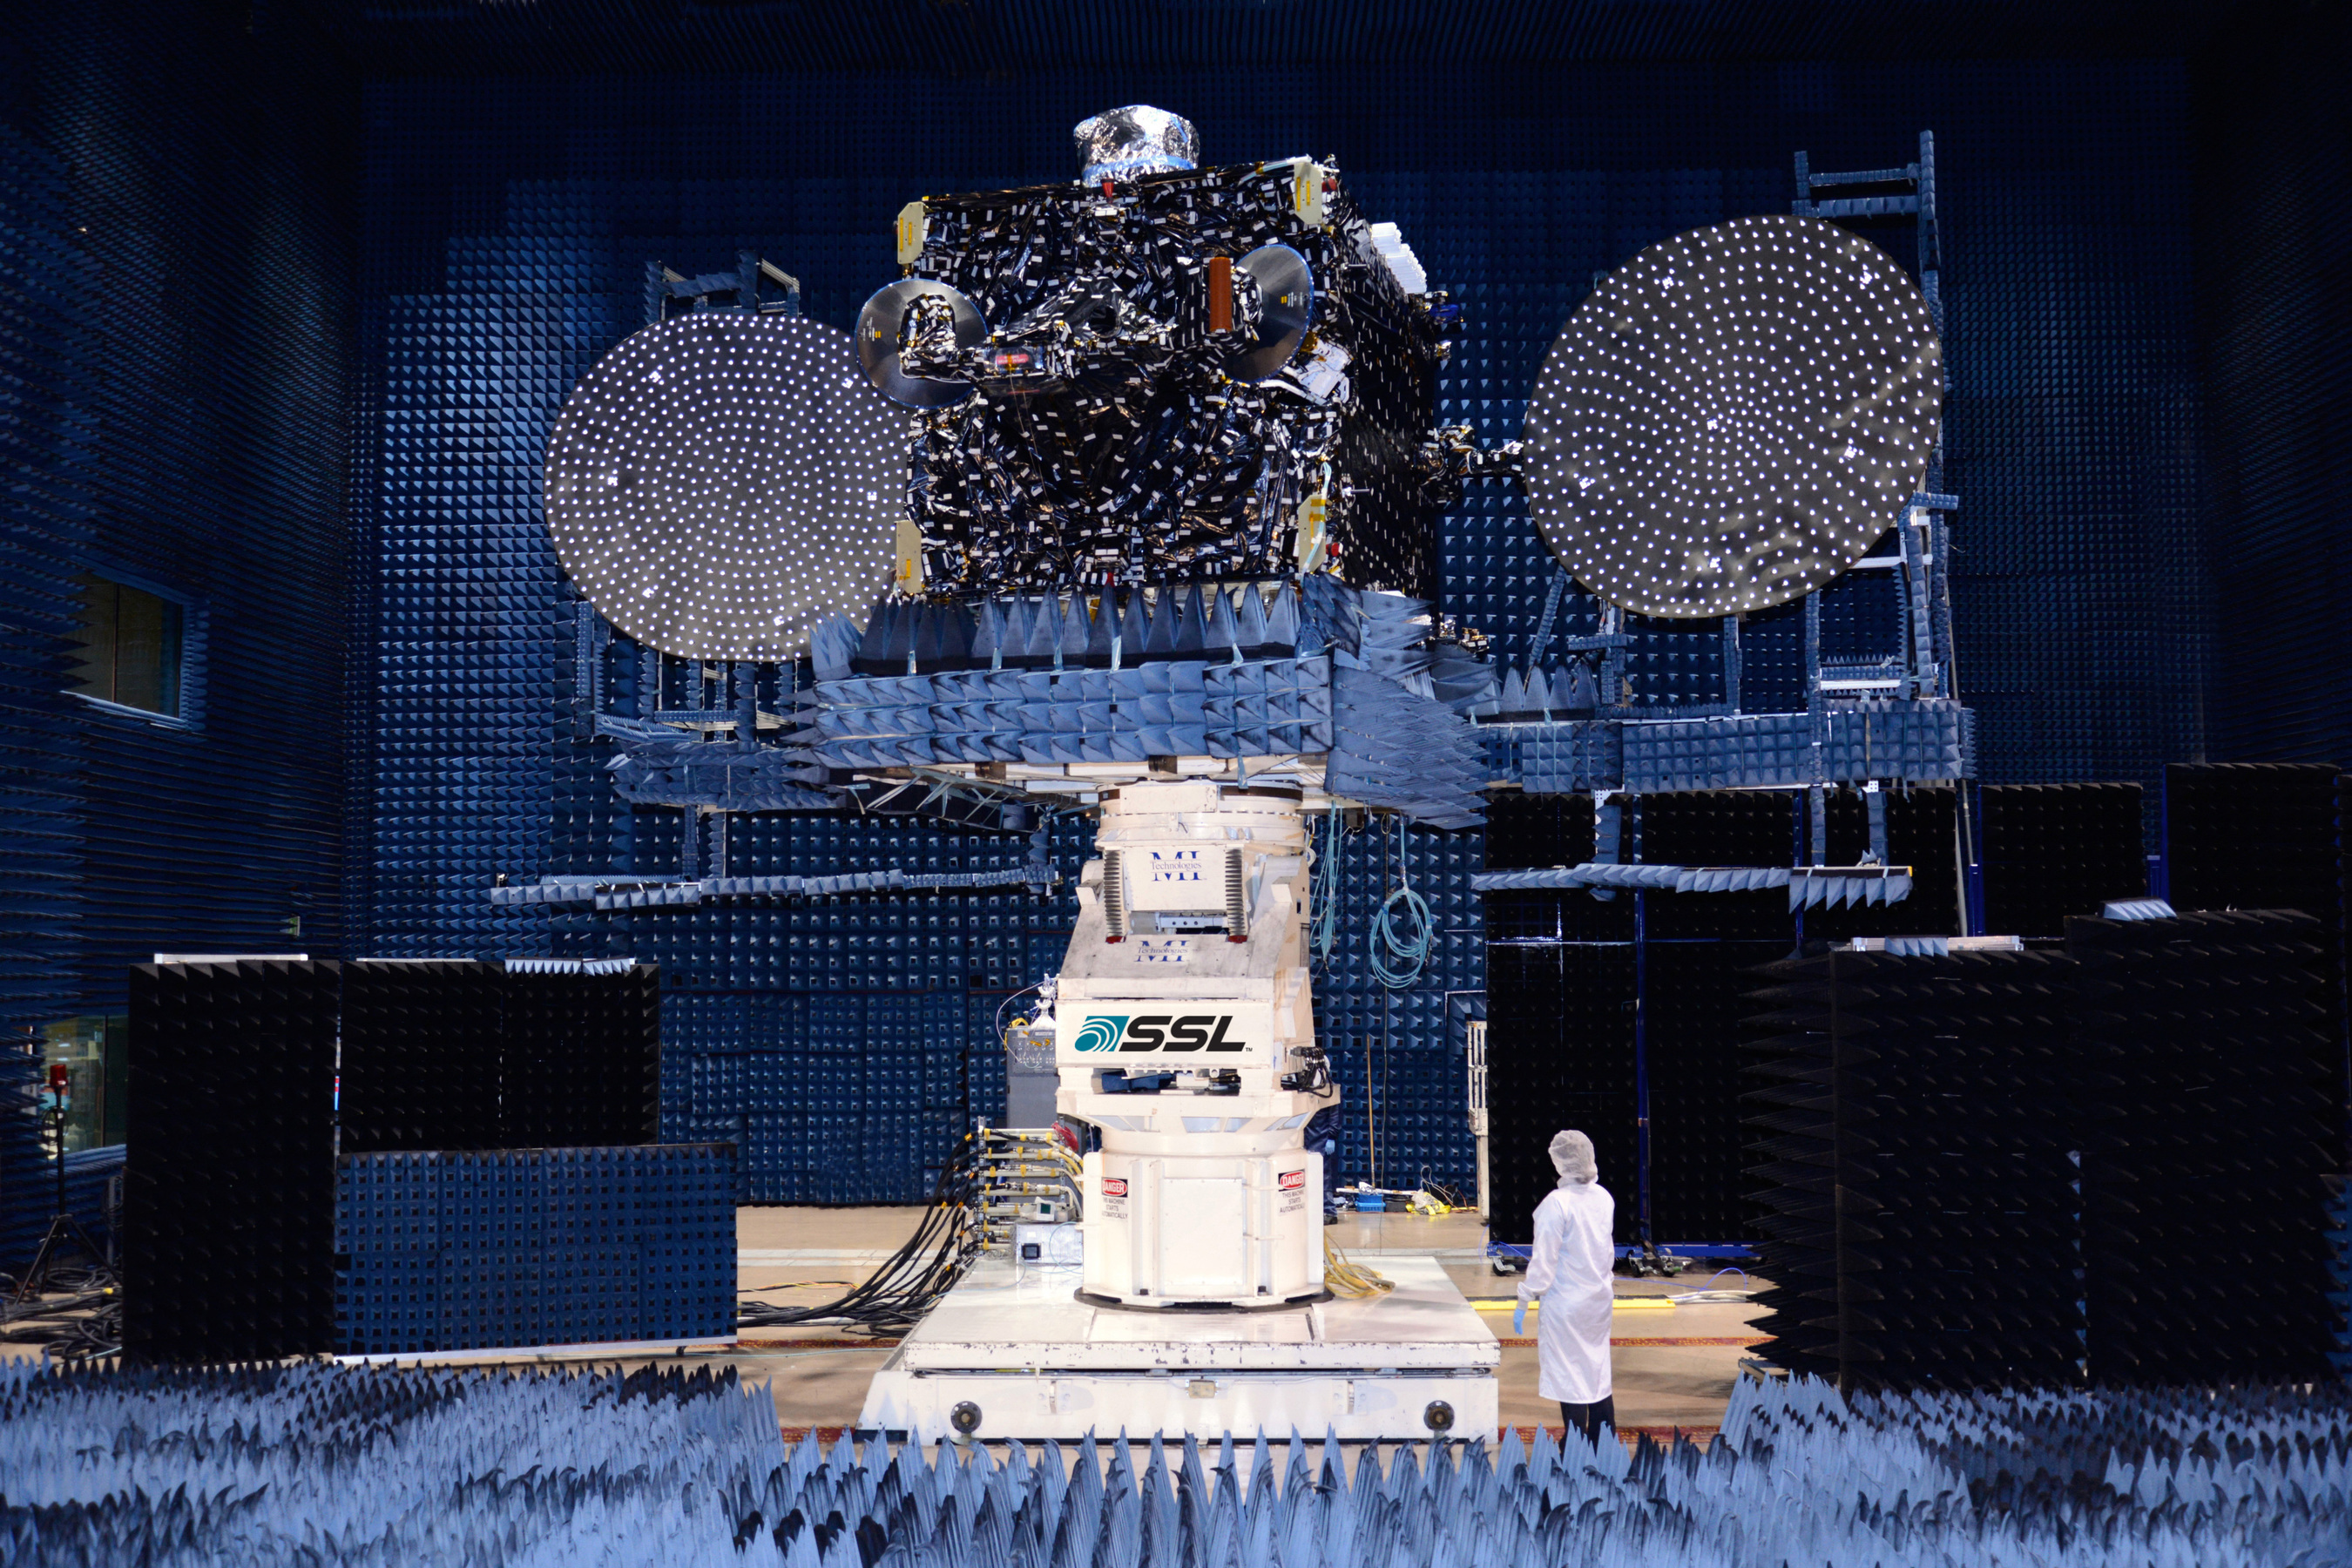 Optus 10 is shown here in the antenna test facility at SSL before it was shipped to launch base. (PRNewsFoto/MacDonald, Dettwiler and Assoc.)